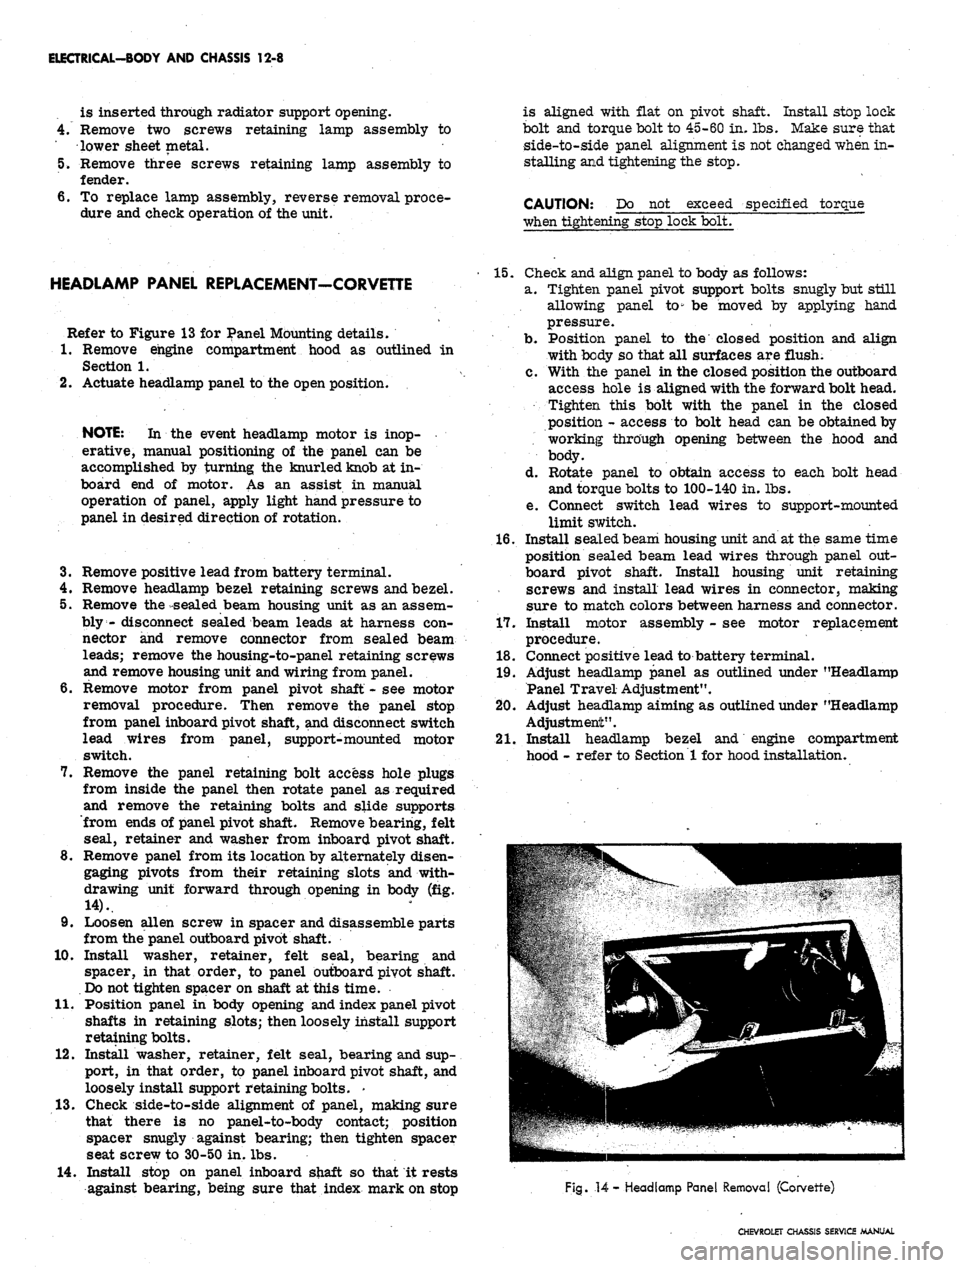 CHEVROLET CAMARO 1967 1.G Chassis Workshop Manual 
ELECTRICAL-BODY AND CHASSIS 12-8

is inserted through radiator support opening.

Remove two screws retaining lamp assembly to

lower sheet metal.

Remove three screws retaining lamp assembly to

lend